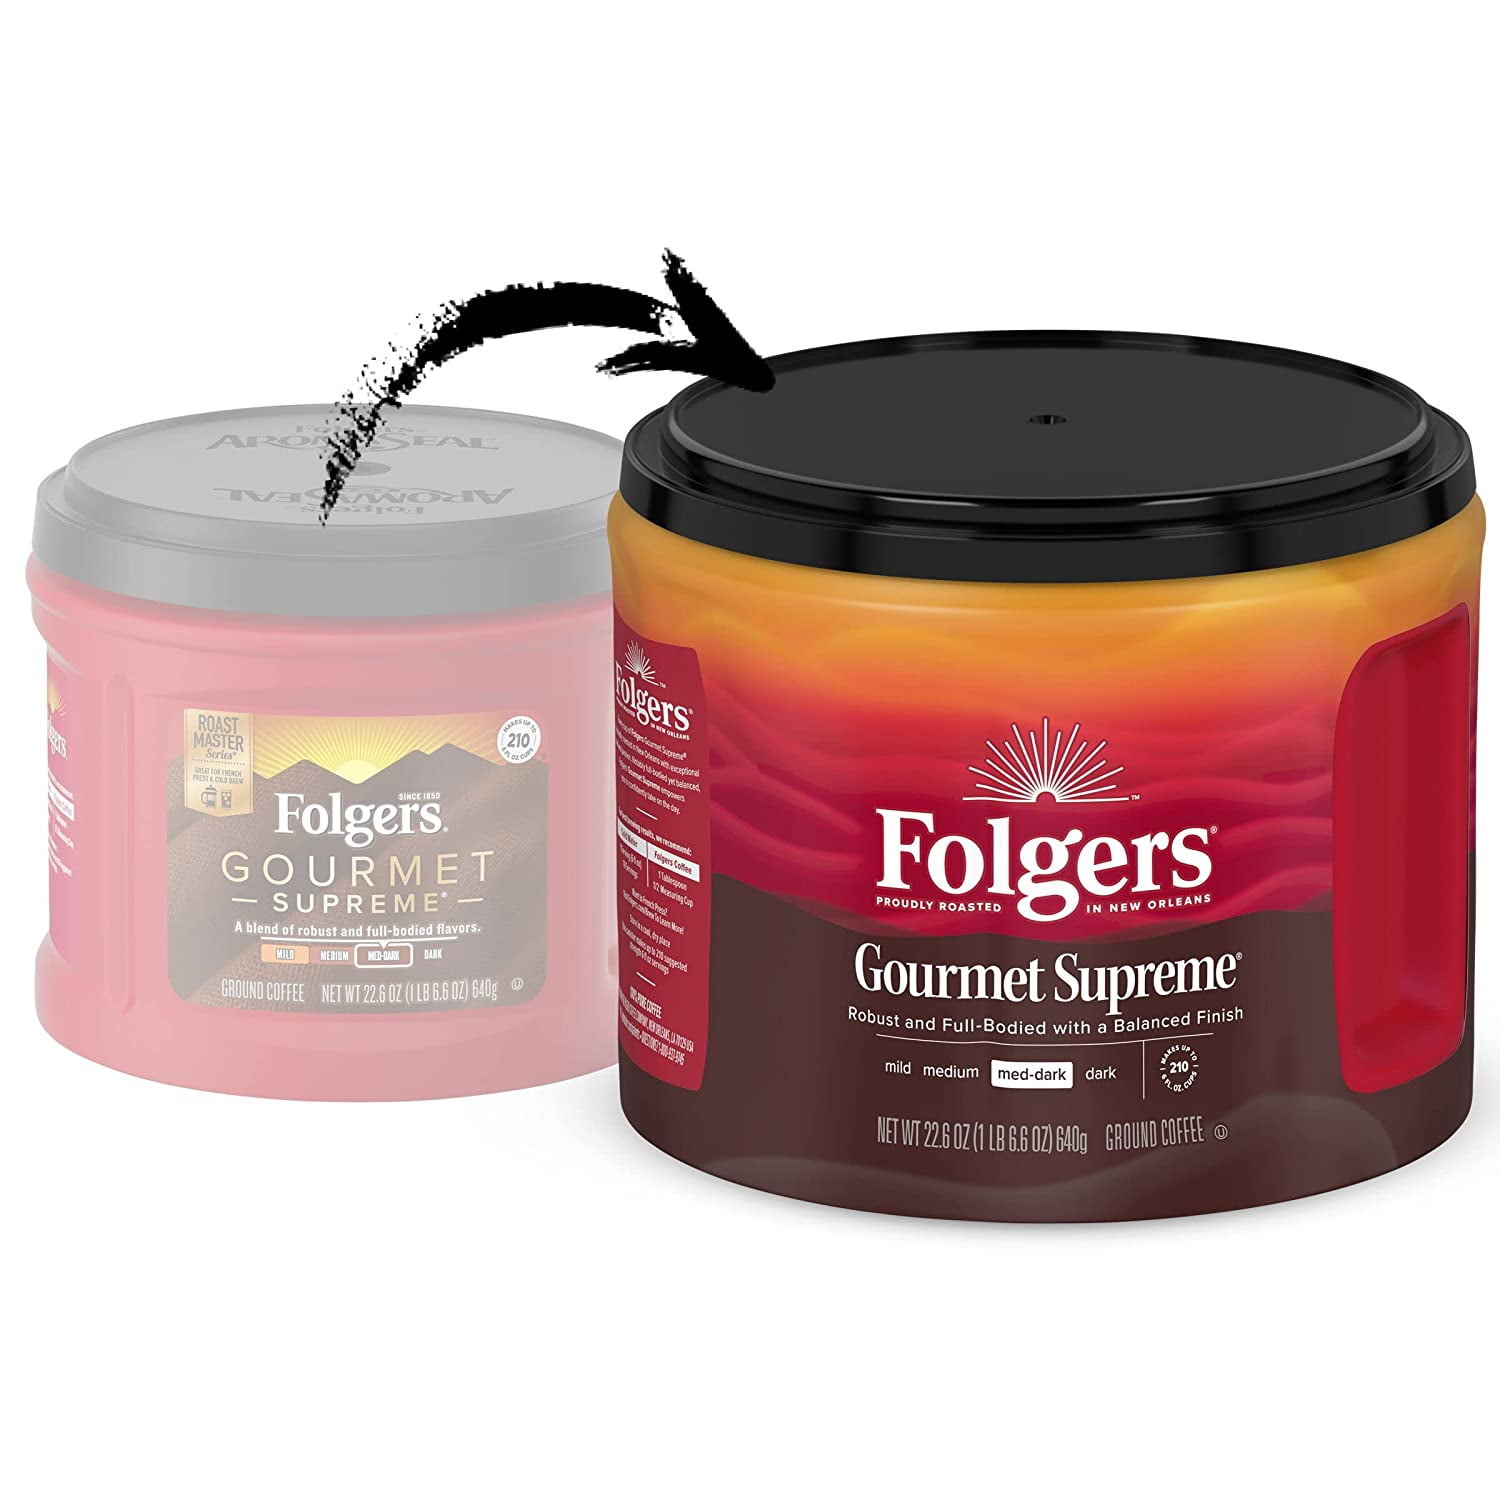 Folgers Gourmet Supreme Ground Coffee, 22.6 Ounce Canisters